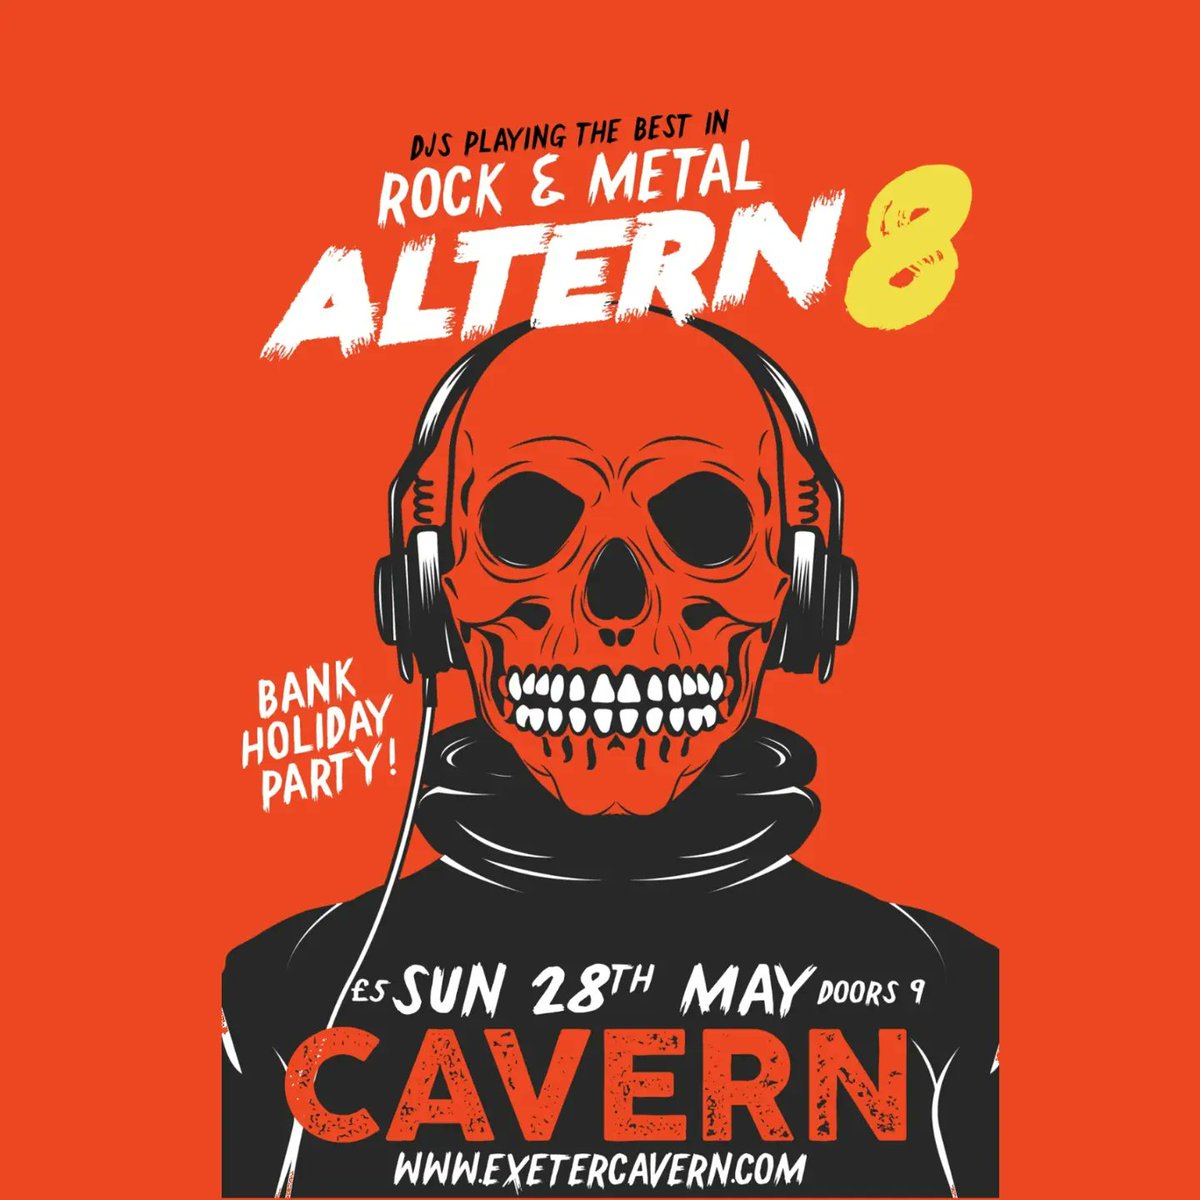 Dates for your diaries #Exeter peeps! Sunday May 28th Friday June 30th Friday July 21st The party is still strong, and we're here all year long! Let's gooooooooooo! Event pages to follow for the June/July dates See some of you Sunday at @exeter_cavern